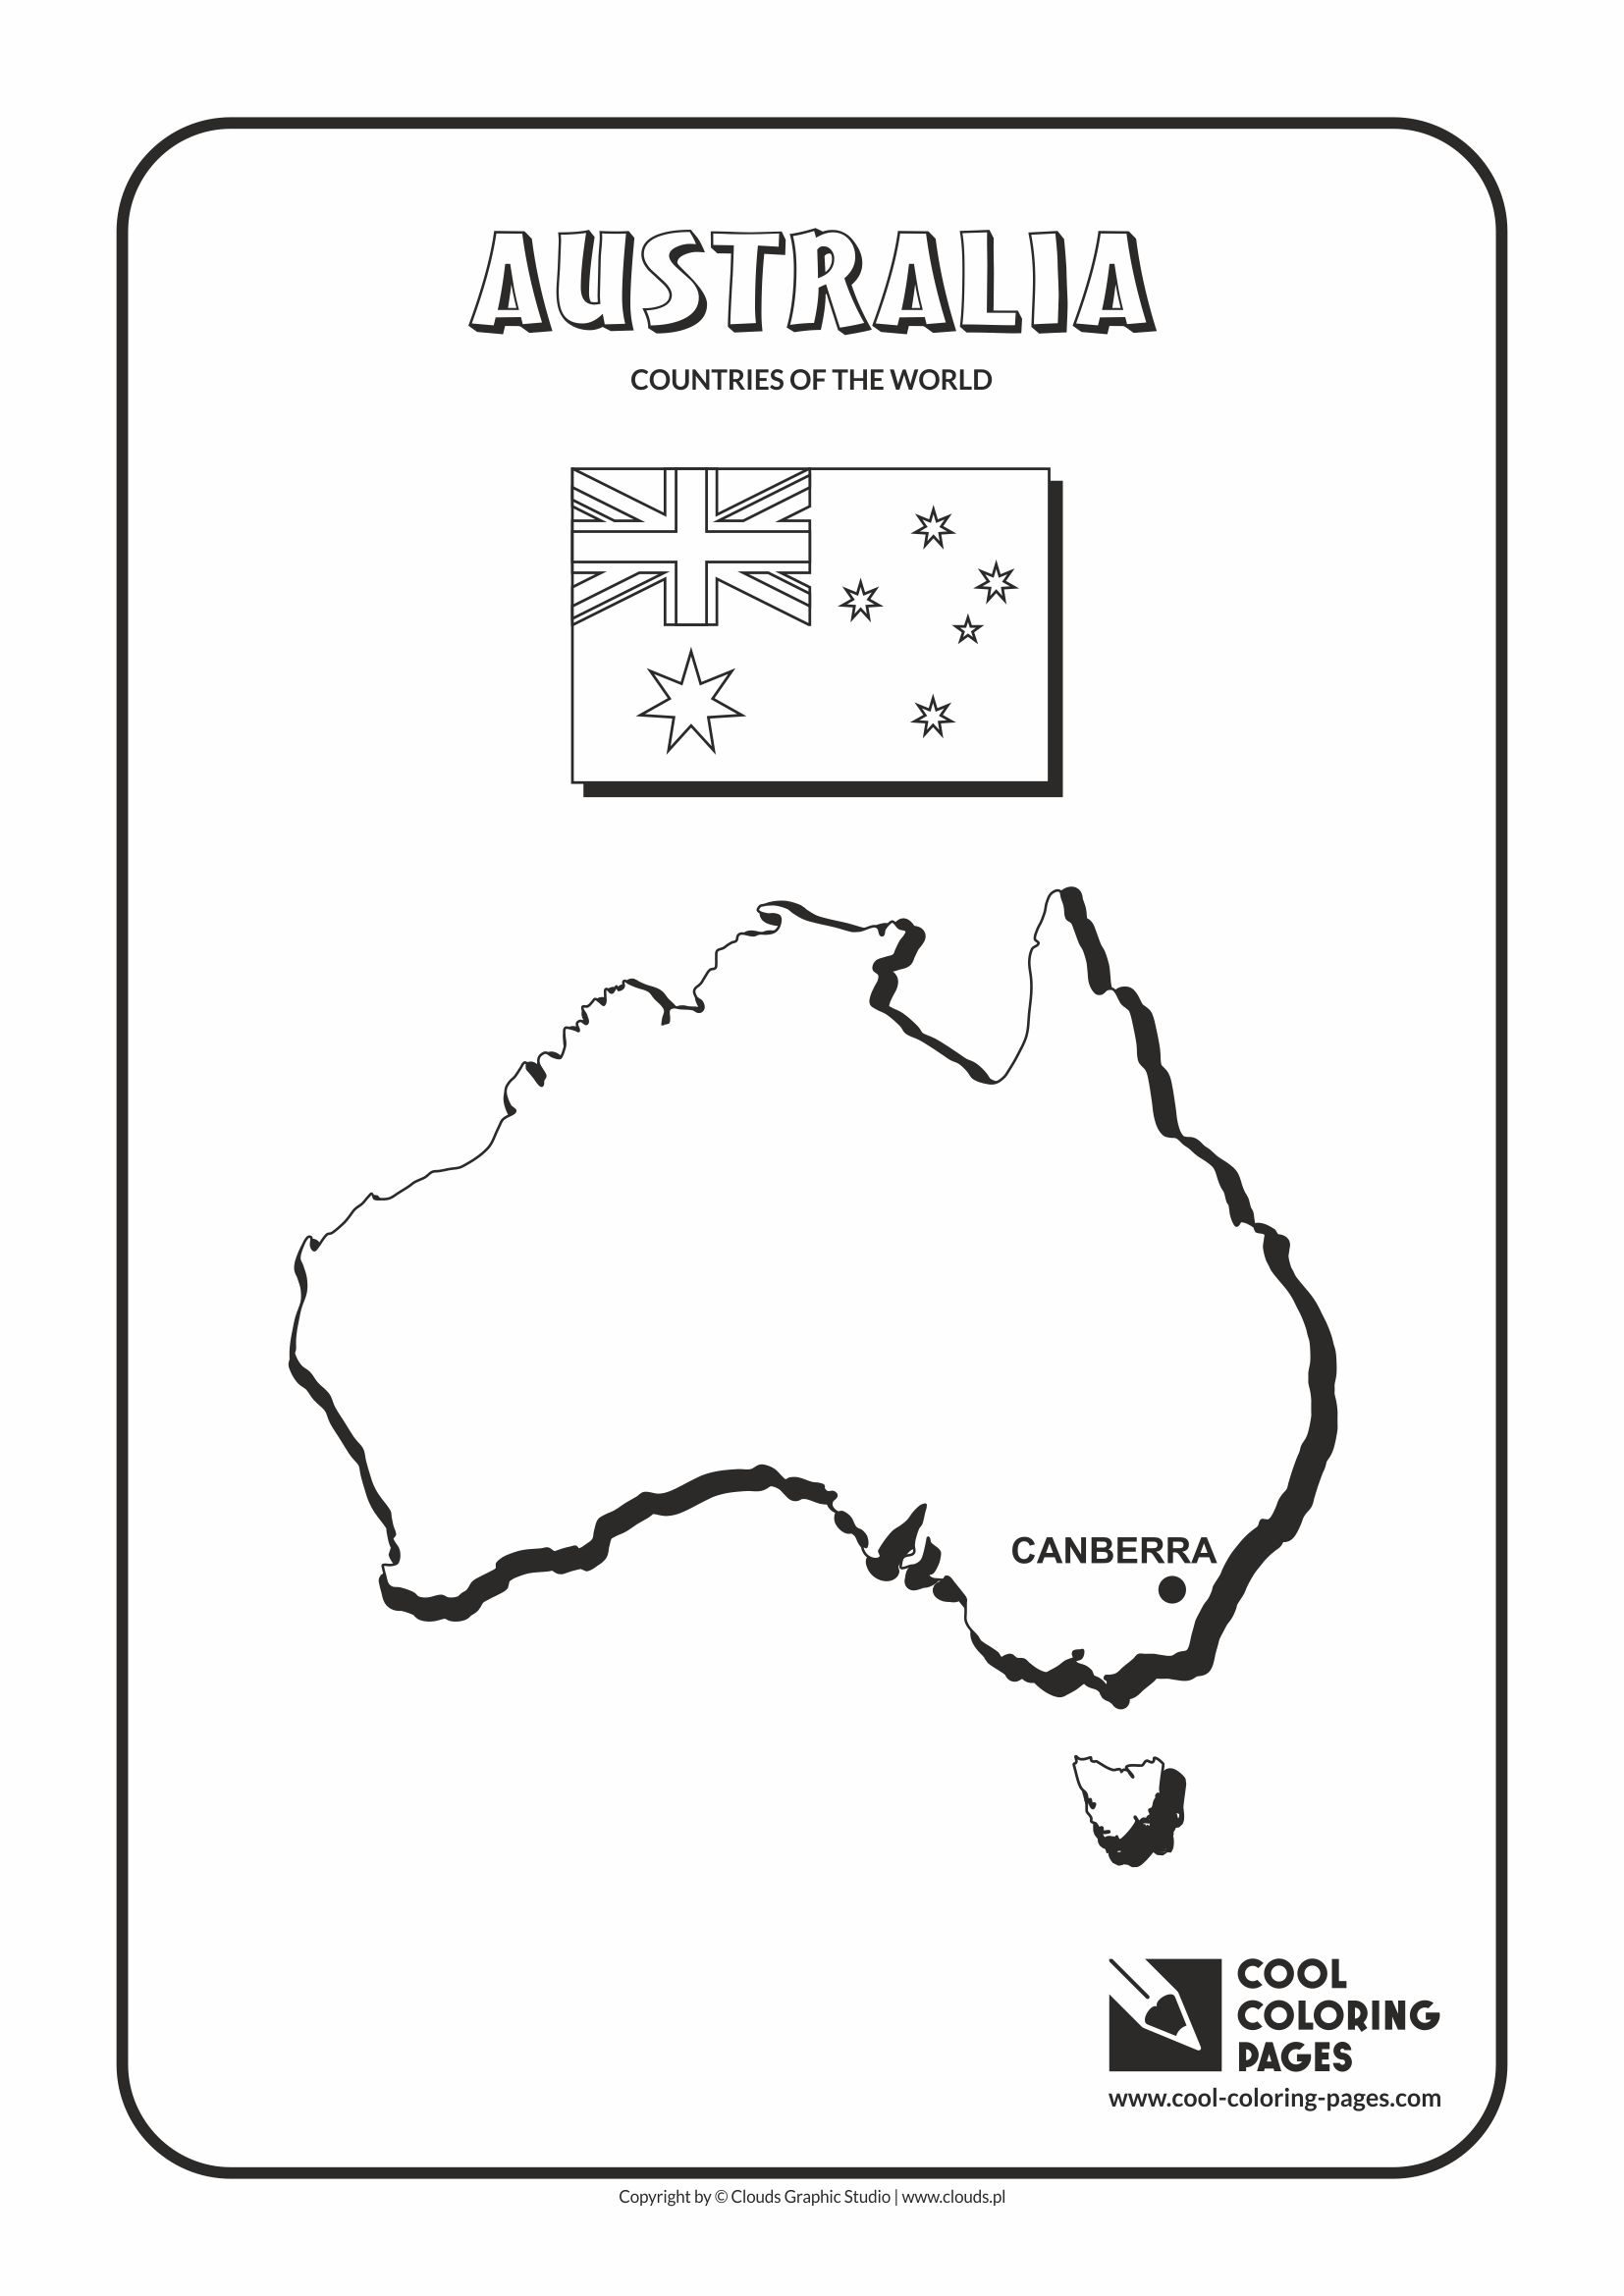 Countries Coloring Pages Cool Coloring Pages Australia Countries Of The World Cool